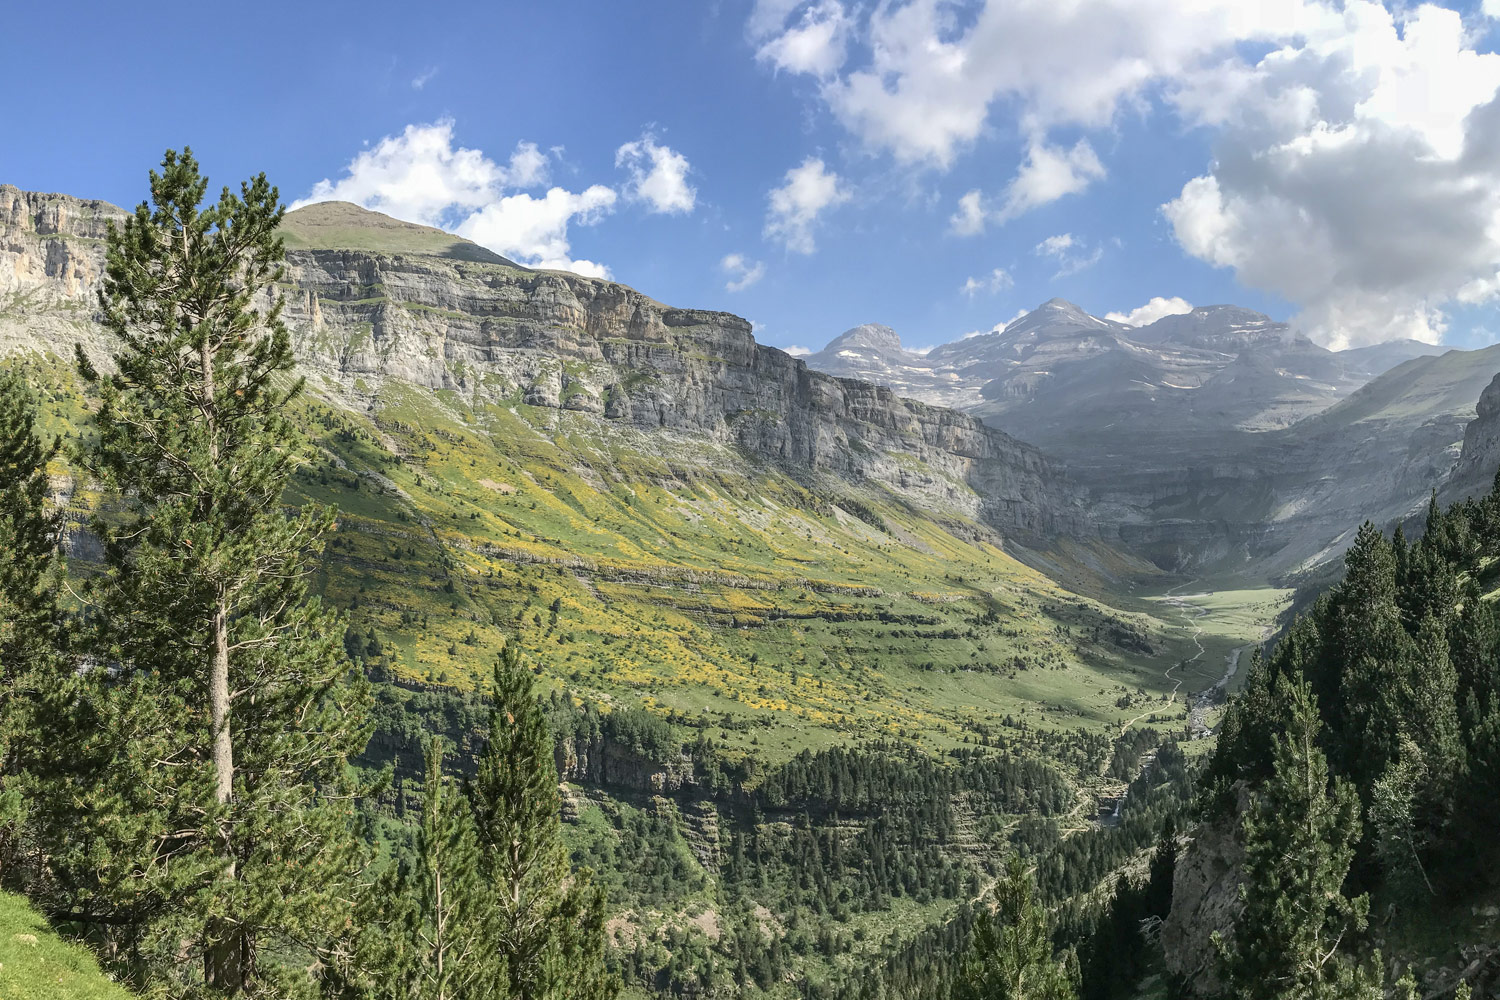 Recap of the 2018 summer holiday to the Pyrenees